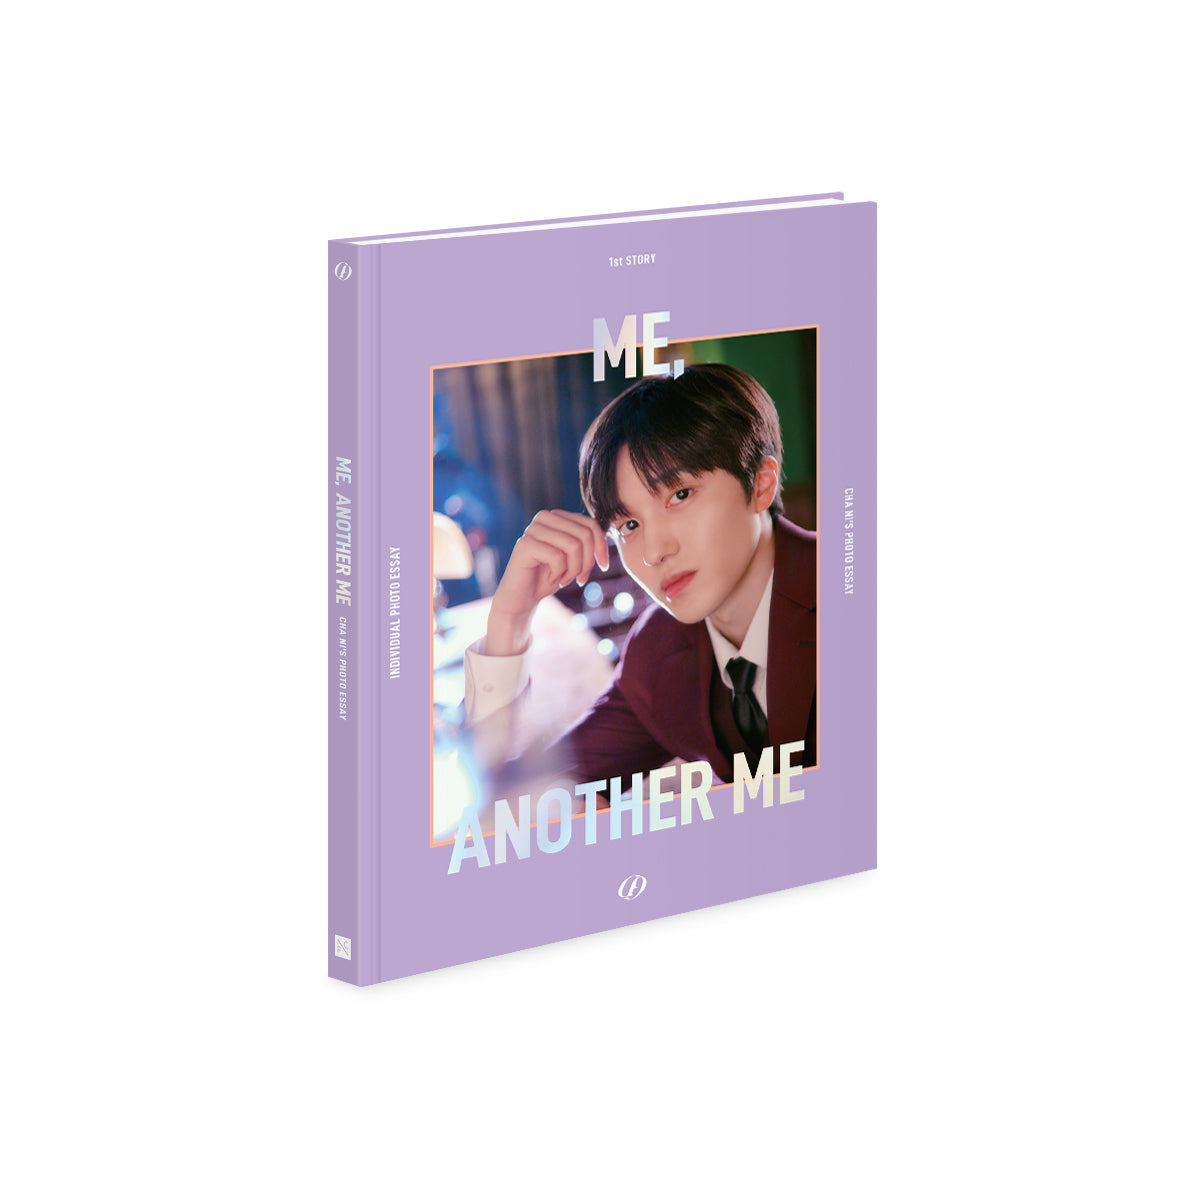 SF9 - HWI YOUNG &amp; CHA NI’S PHOTO ESSAY [ME, ANOTHER ME]